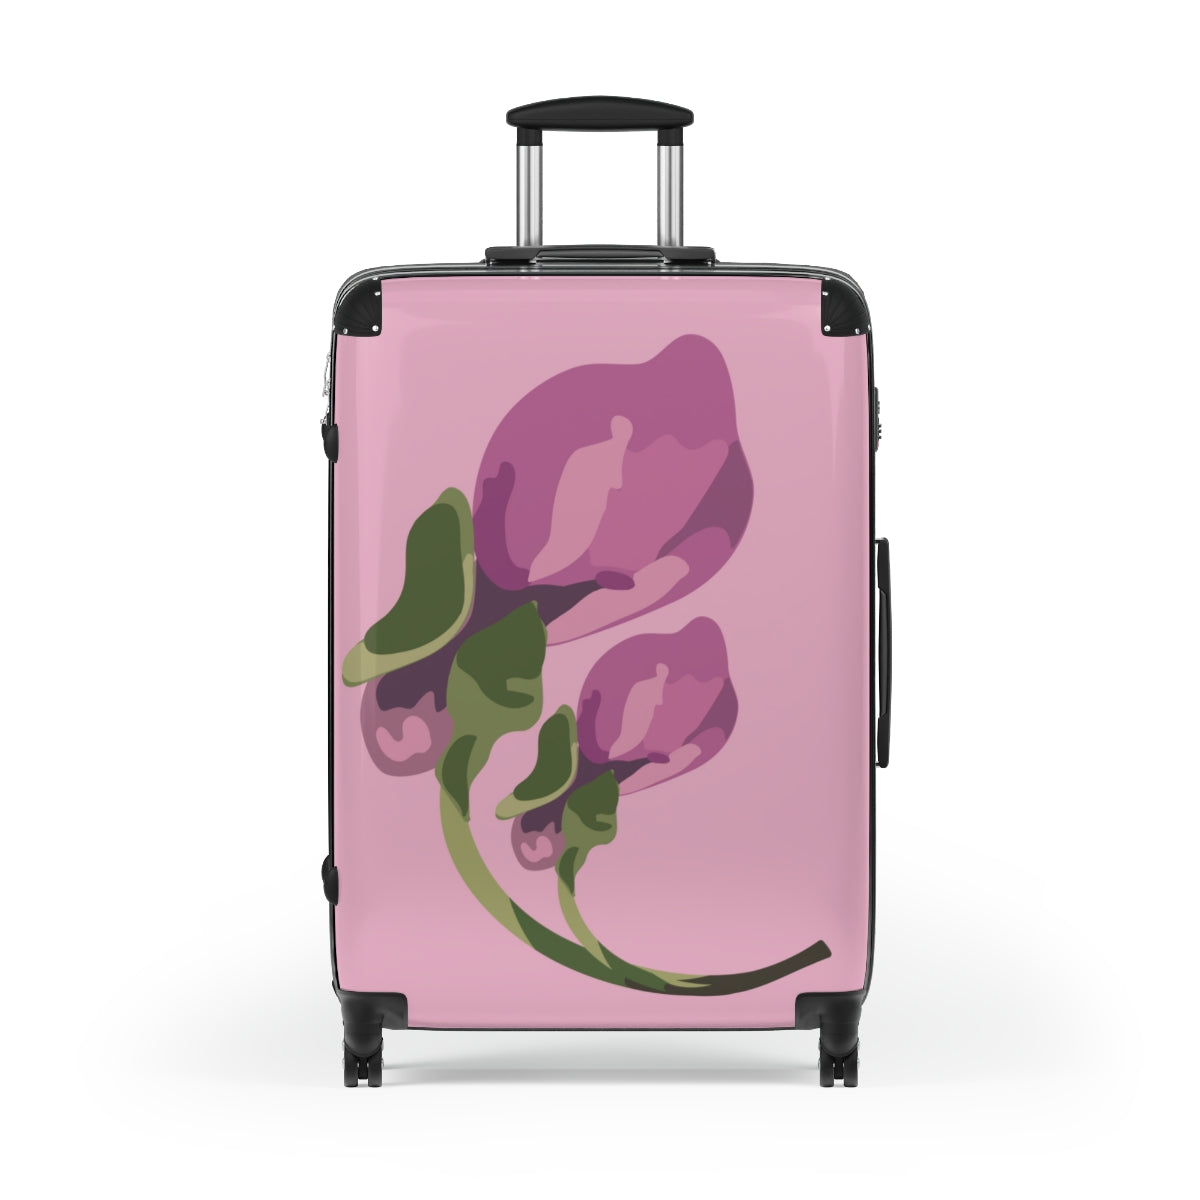 PINK FLORAL SUITCASE SET Artzira, Cabin Suitcase Carry-On Luggage, Trolly Travel Bags Double Wheeled Spinners, Women's Choice